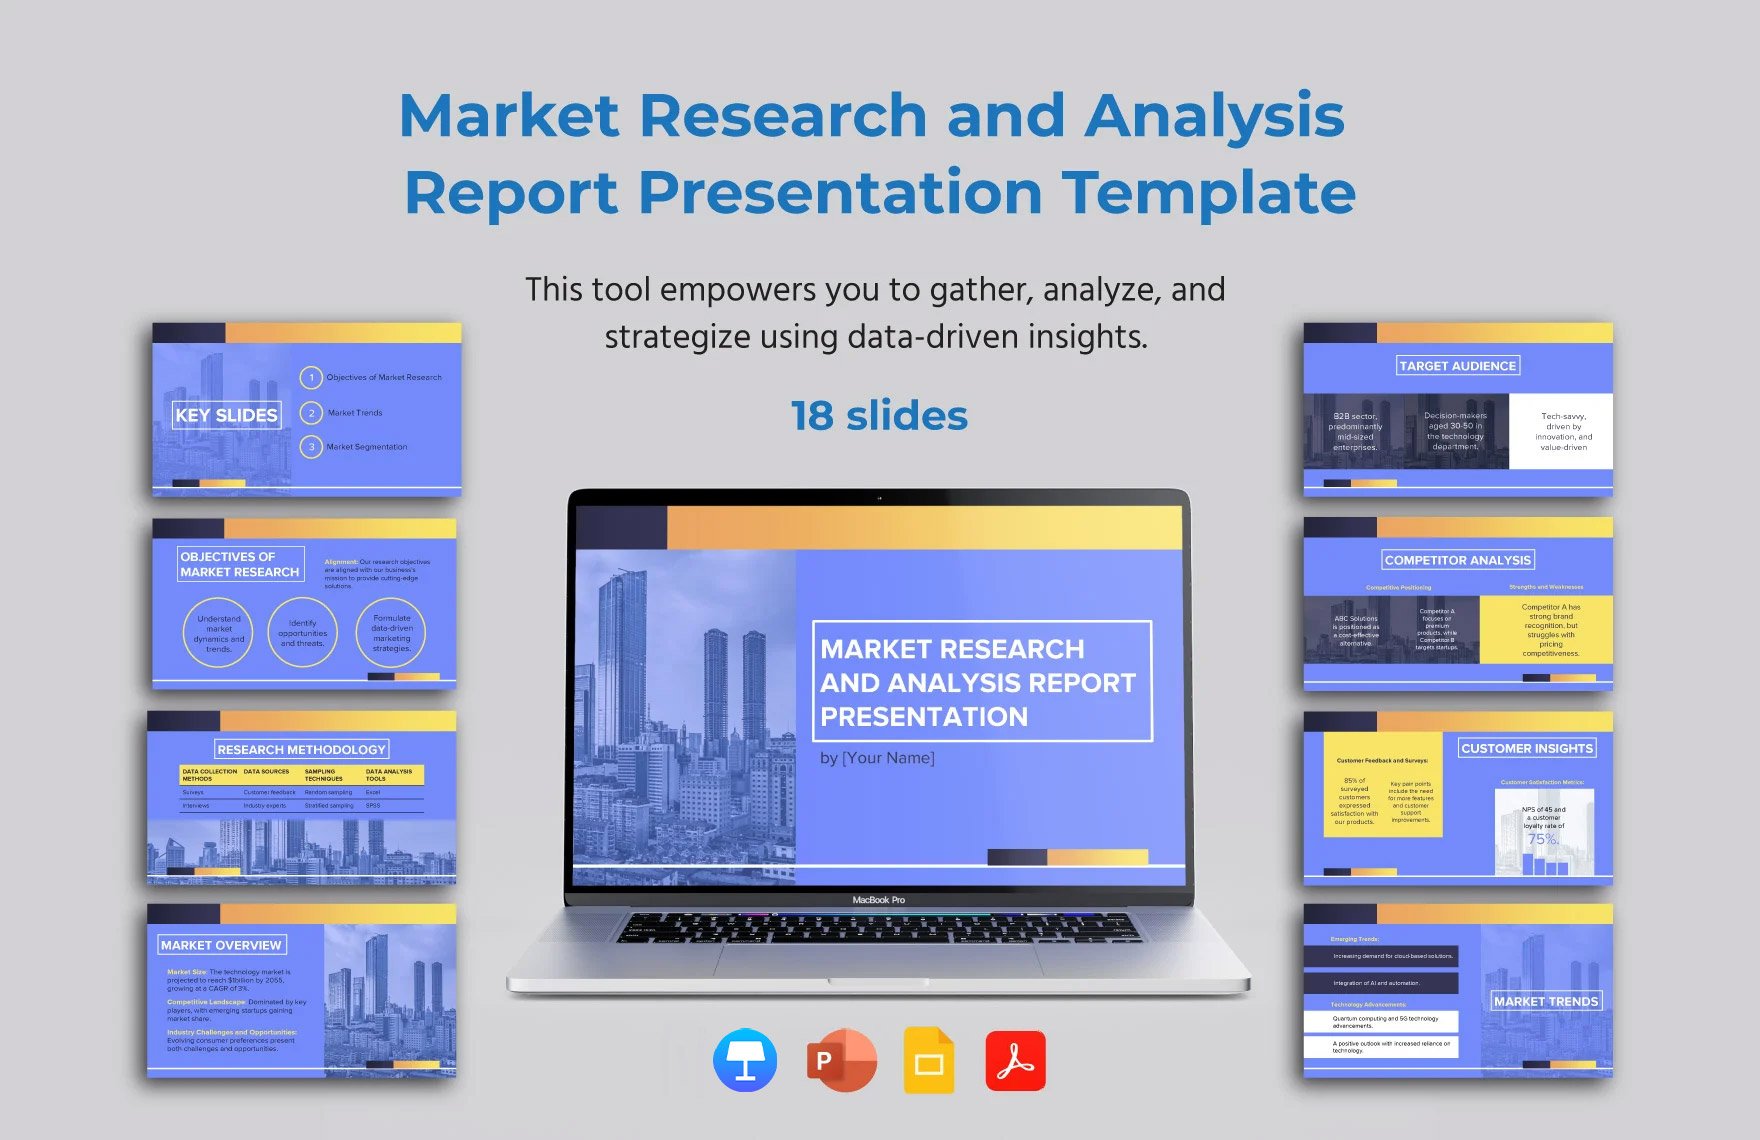 Market Research and Analysis Report Presentation Template